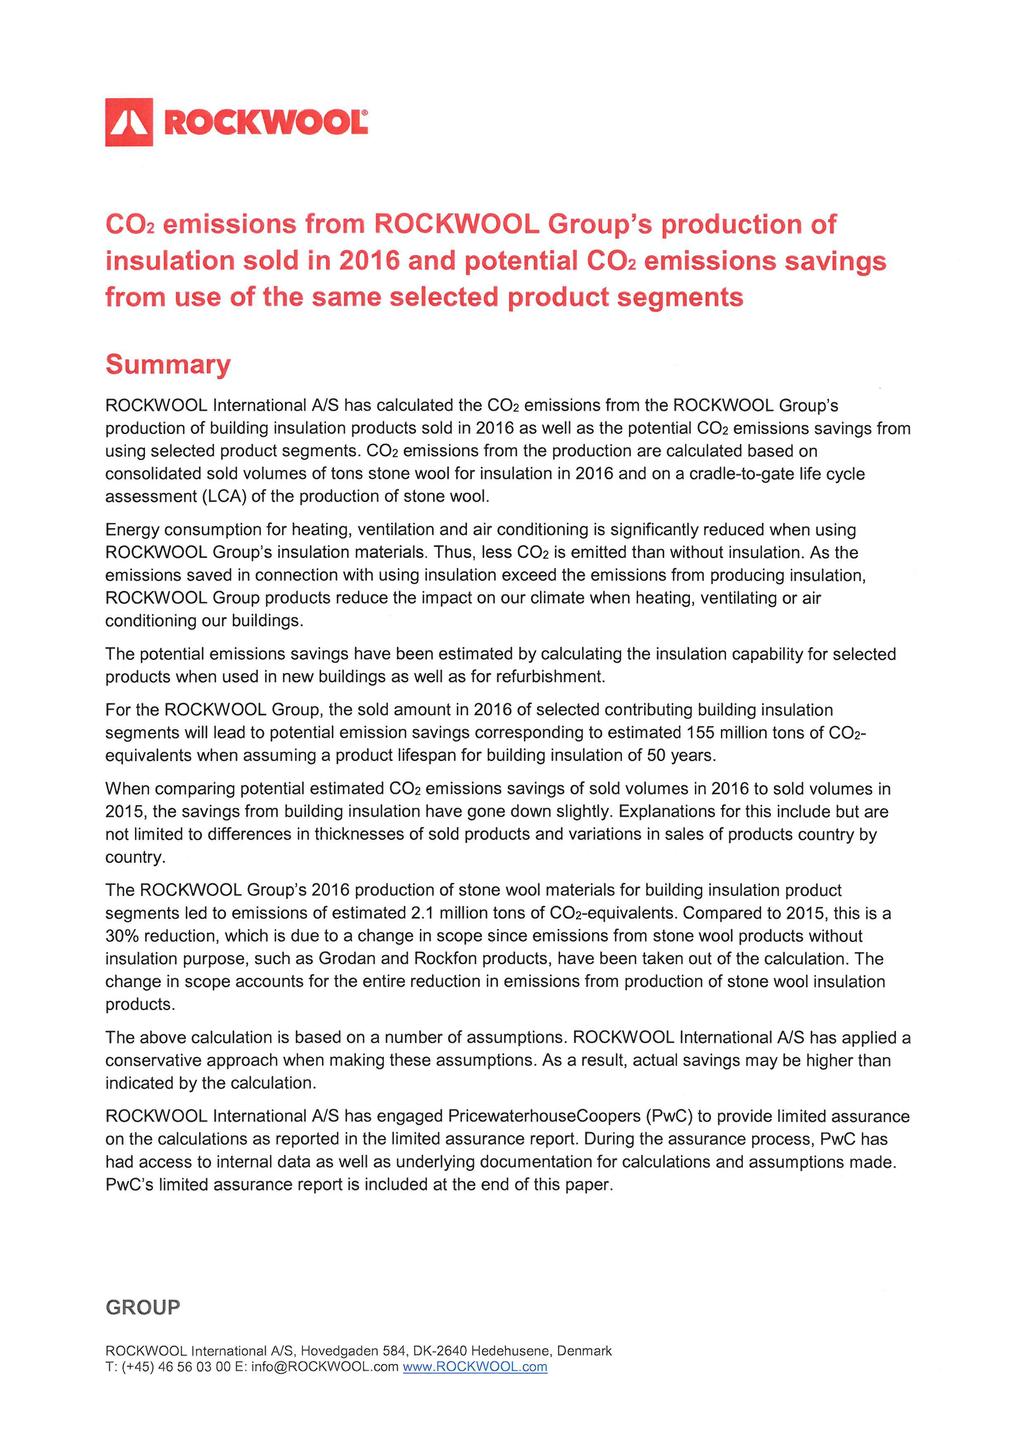 CO2 emissins frm ROCKWOOL Grup's prductin f insulatin sld in 2016 and ptential CO2 emissins savings frm use f the same selected prduct segments Summary ROCKWOOL Internatinal A/S has calculated the